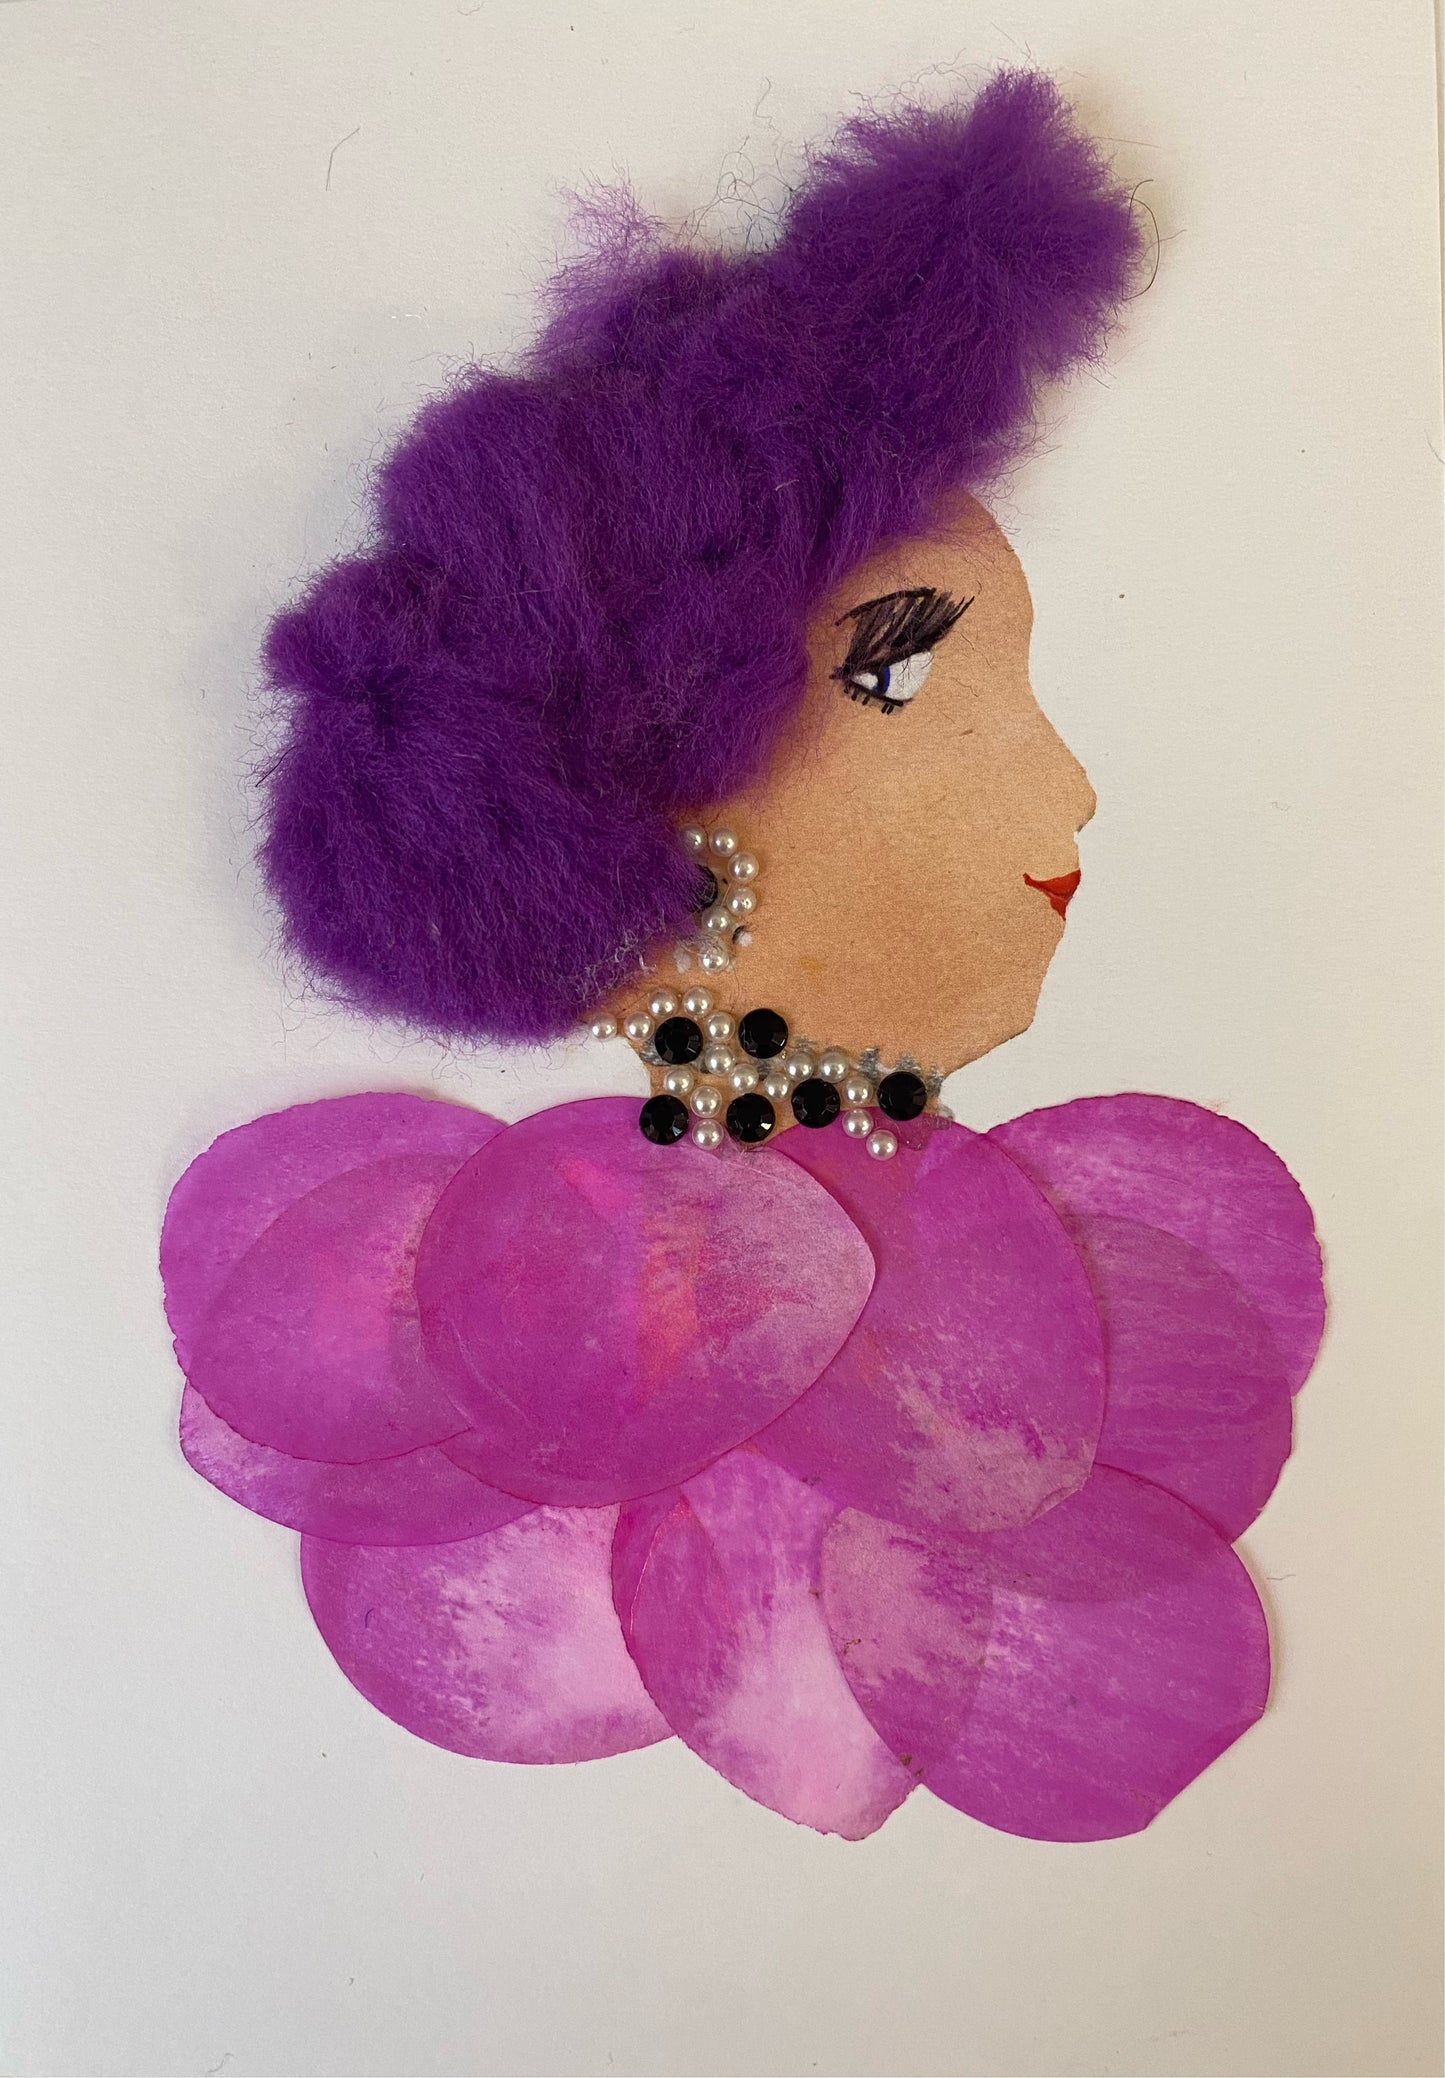 I designed this card of a woman called Rosie Pink. She has a white skin tone and wears a fluffy purple hatinator. She wears a pink flower petal blouse and wears black and pearl jewellery.  